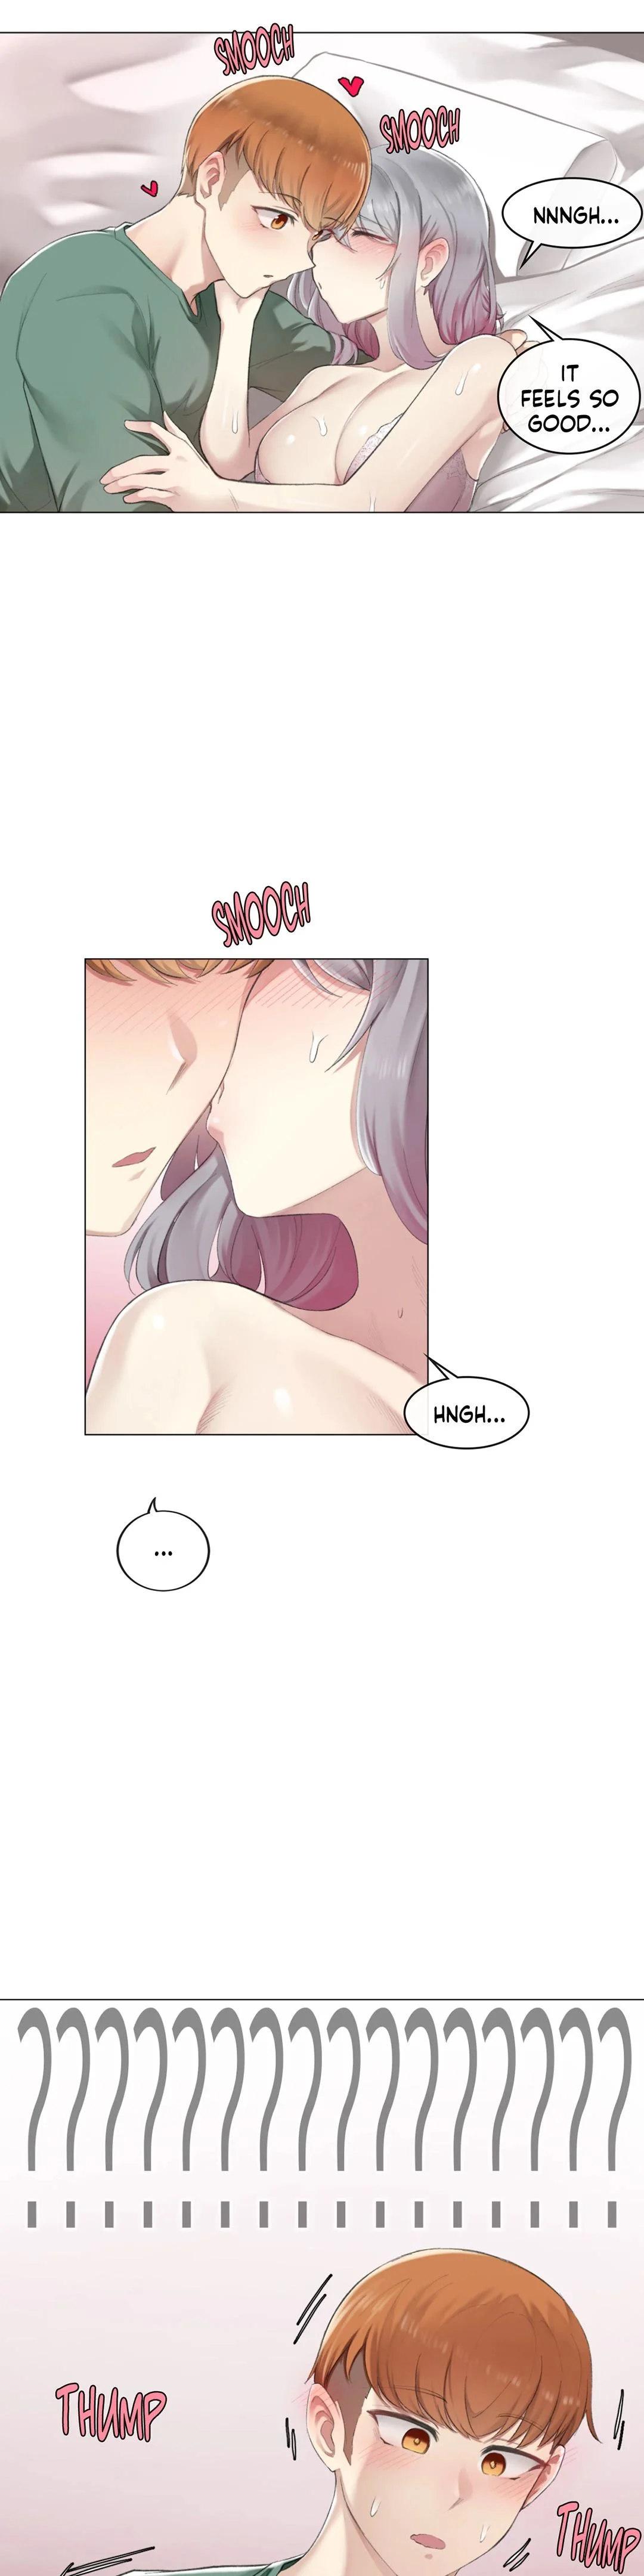 [Dumangoon, KONG_] Sexcape Room: Snap Off Ch.7/7 [English] [Manhwa PDF] Completed 86